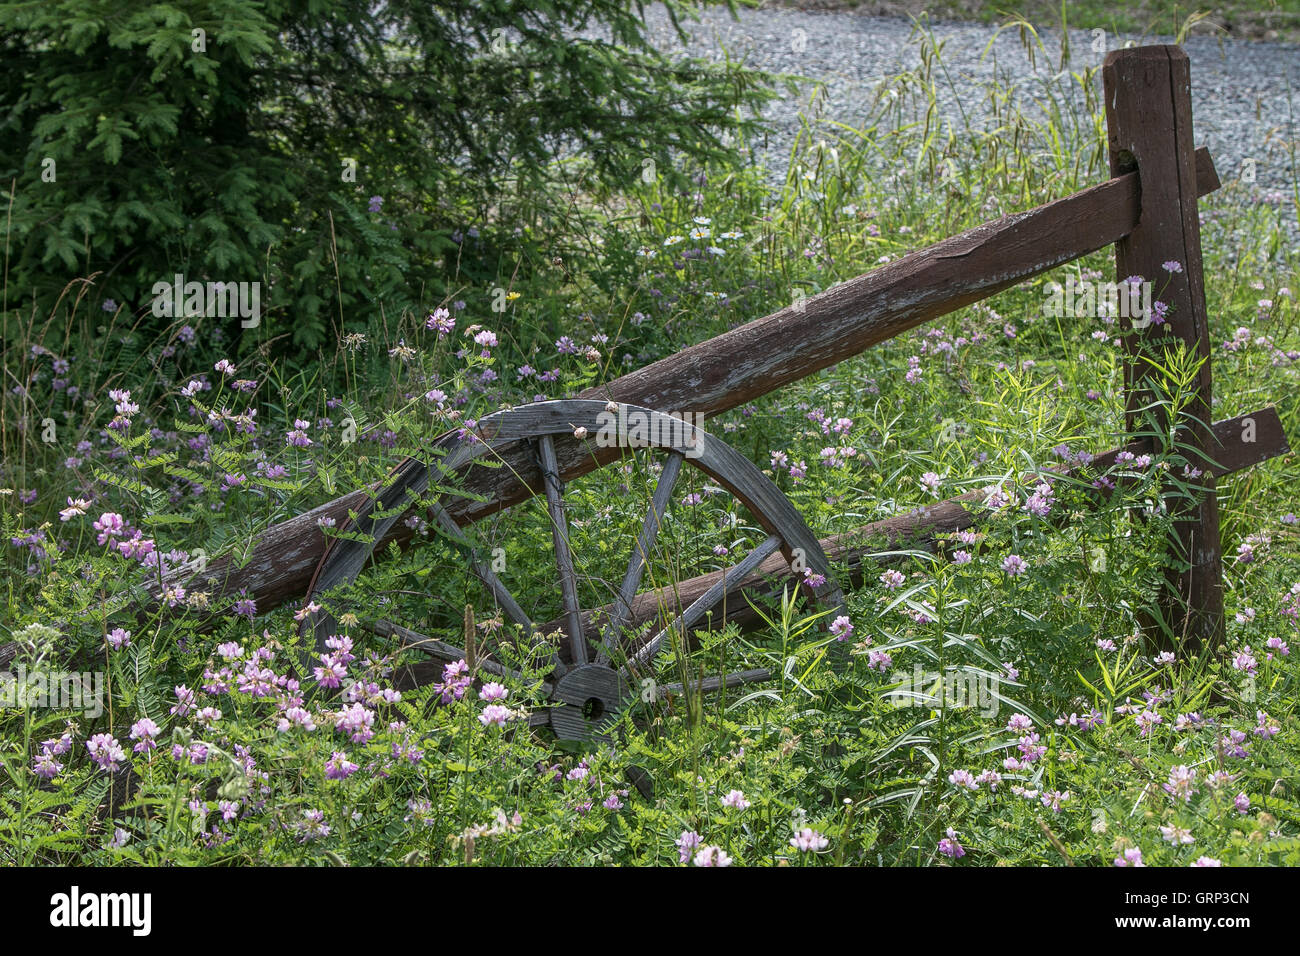 An old wooden wheel leaning against an old wooden gate overgrown by grass. Stock Photo